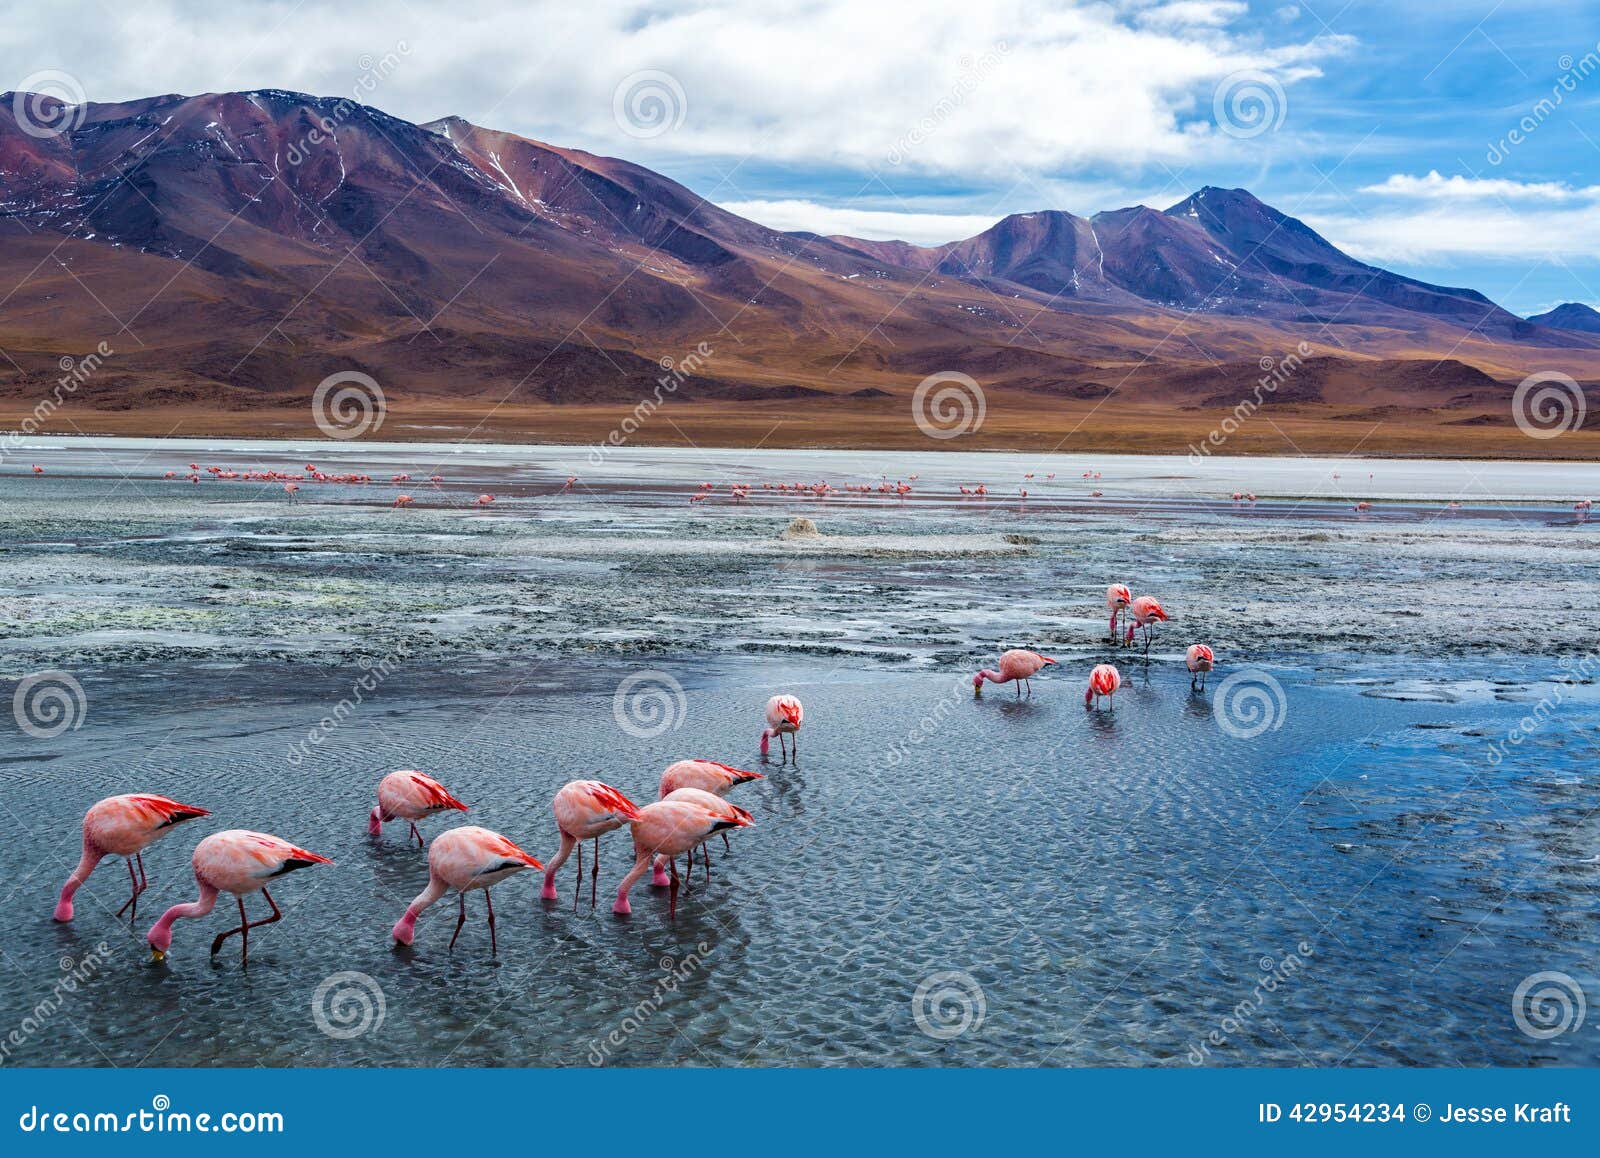 pink flamingoes in bolivia